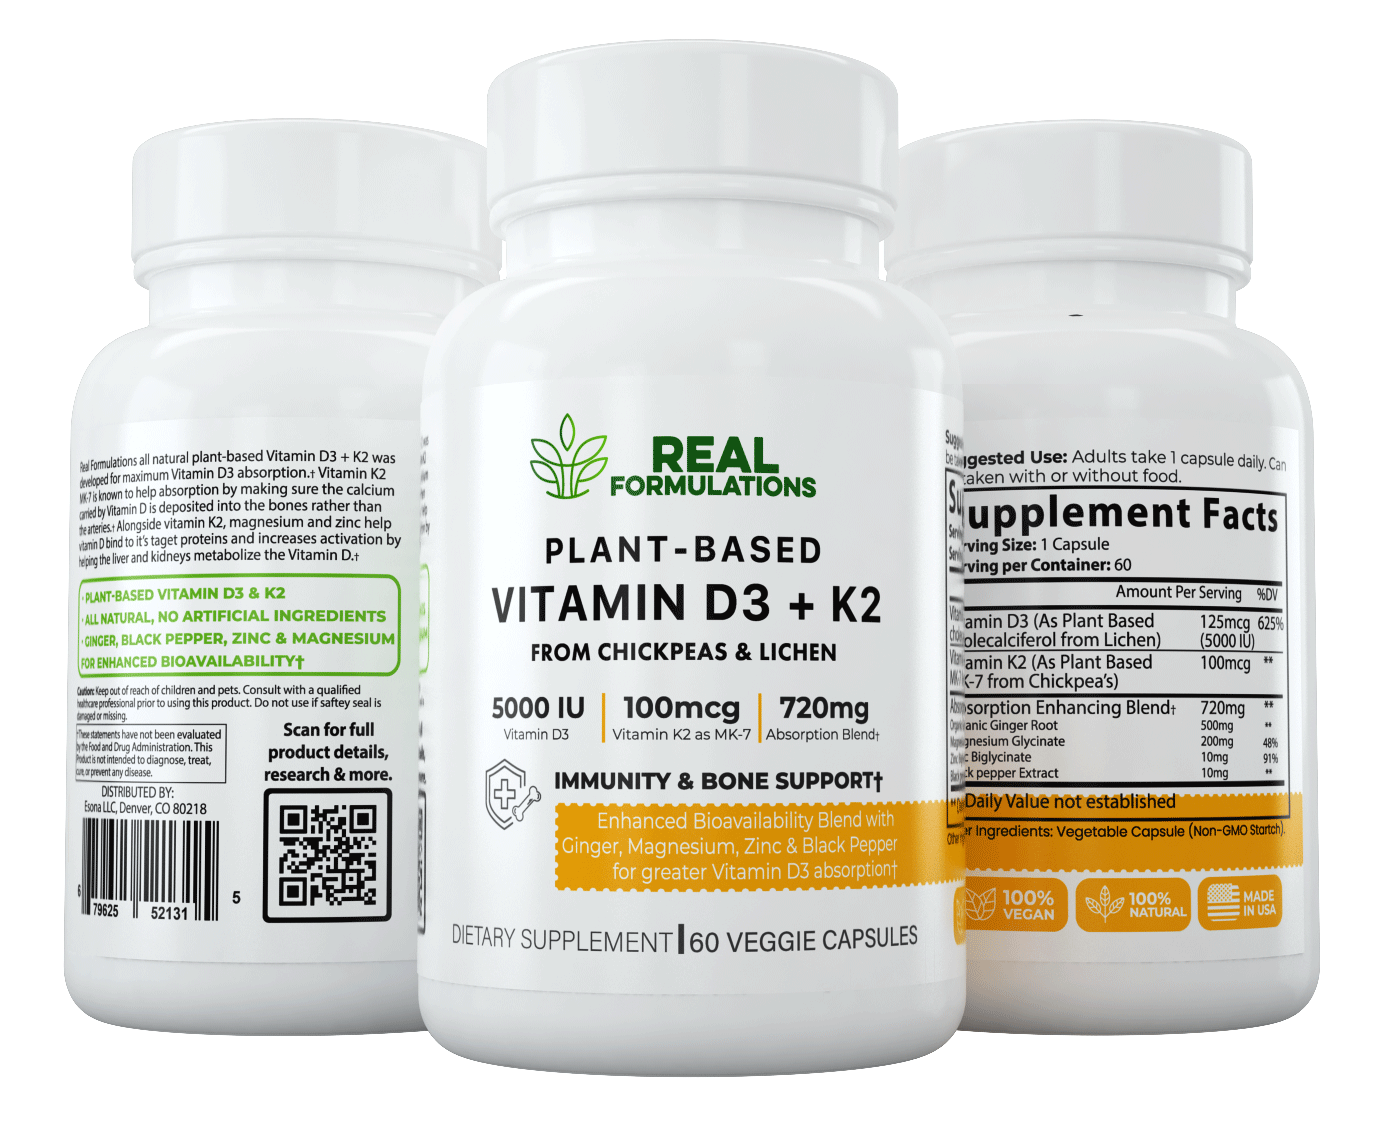 Real Formulations Plant-Based Vitamin D3 + K2. A blend of Plant-Based Vitamin D3 (from Lichen), Vitamin K2 (From Chickpea's), Ginger Root, Magnesium Glycinate, Zinc Biglycinate, and Black Pepper Extract.